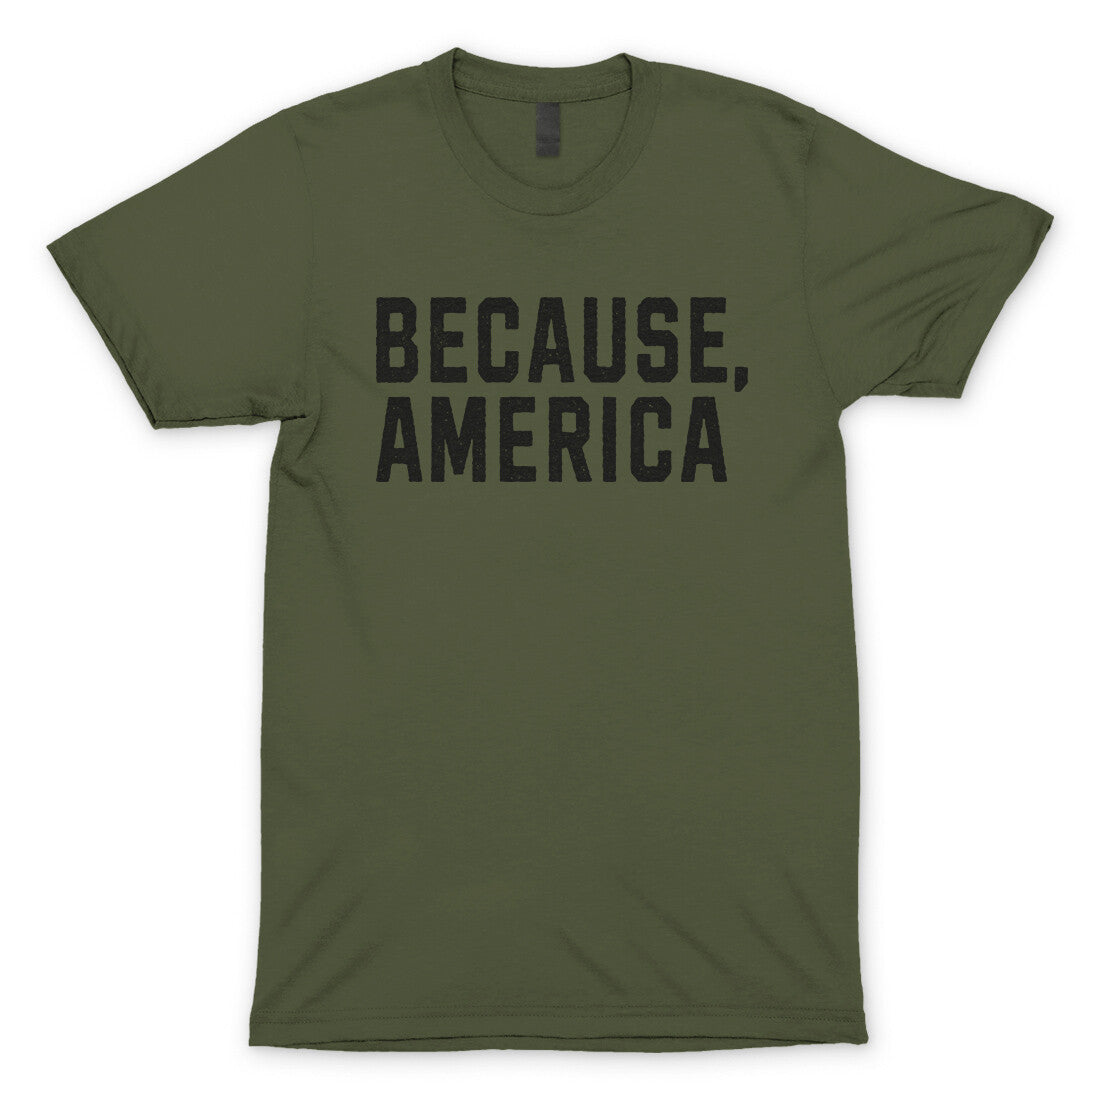 Because America in Military Green Color